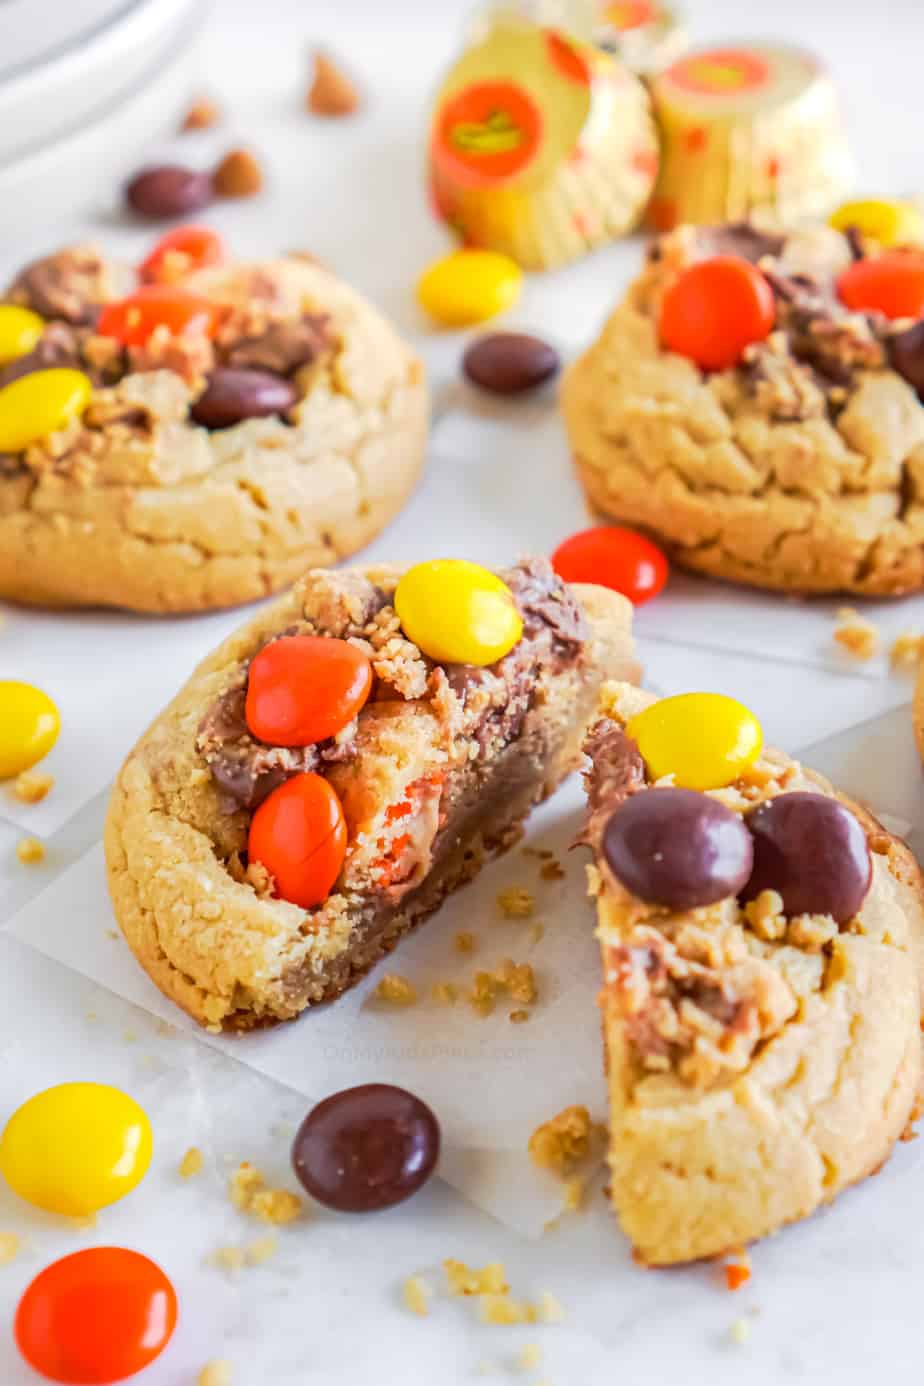 Cookie slices in half to see the inside up close covered in peanut butter candies and pieces of peanut butter cups